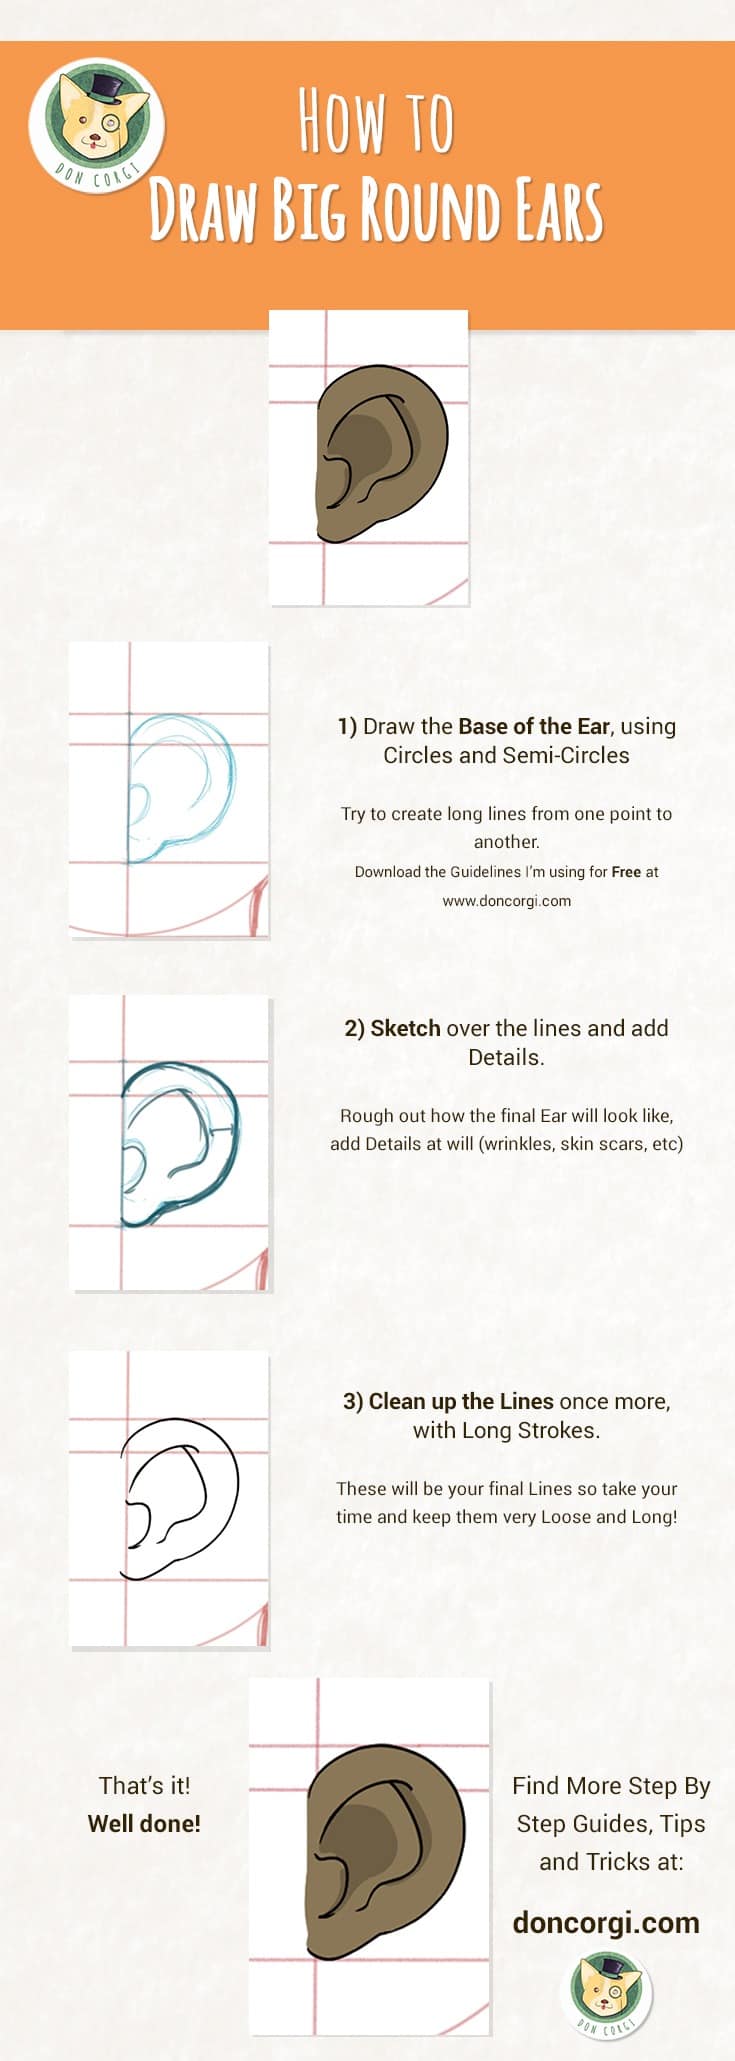 How to Draw Ears - Drawing Round Ears by Don Corgi